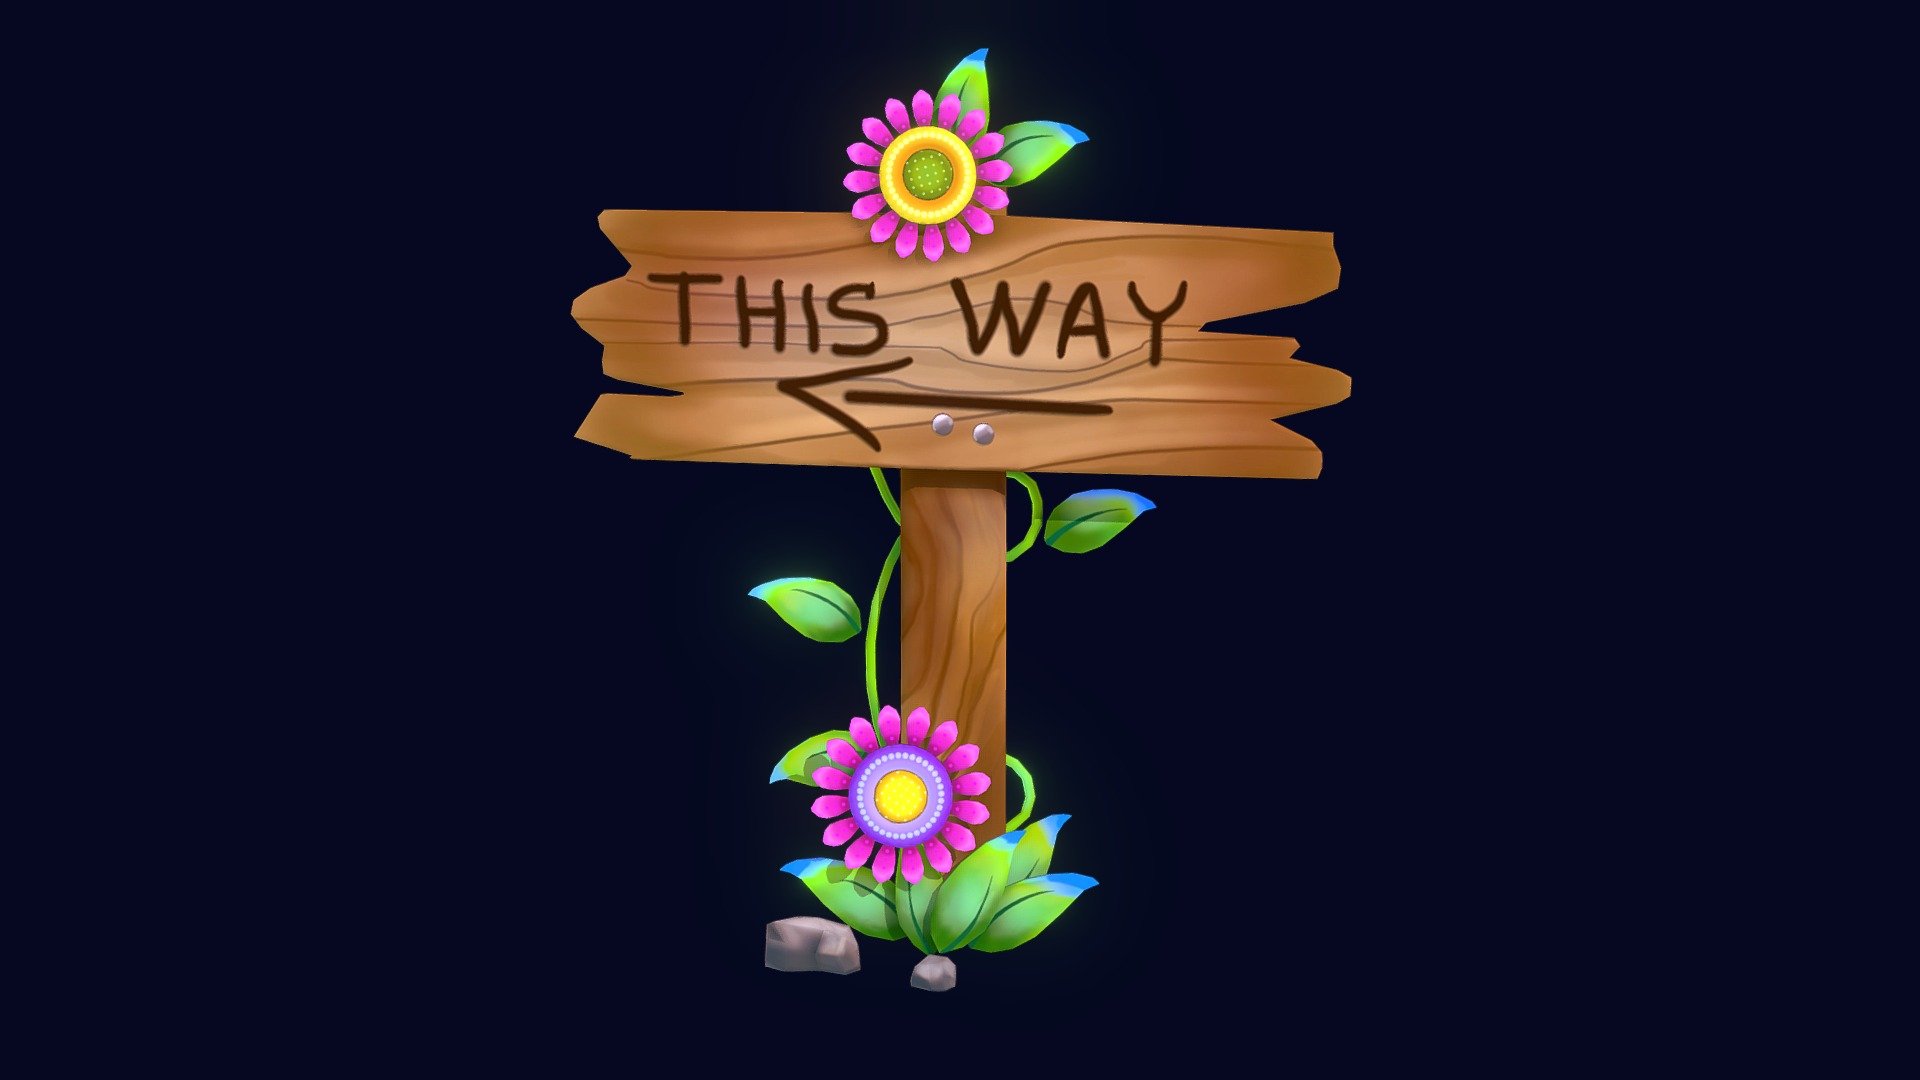 http://)This is My first handpaint texture!
The first time I saw Road sign  Illustration (https://www.pinterest.co.uk/pin/13299761383101794/) , I wanted to recreate it in 3D! This was a good practise for me 3d model